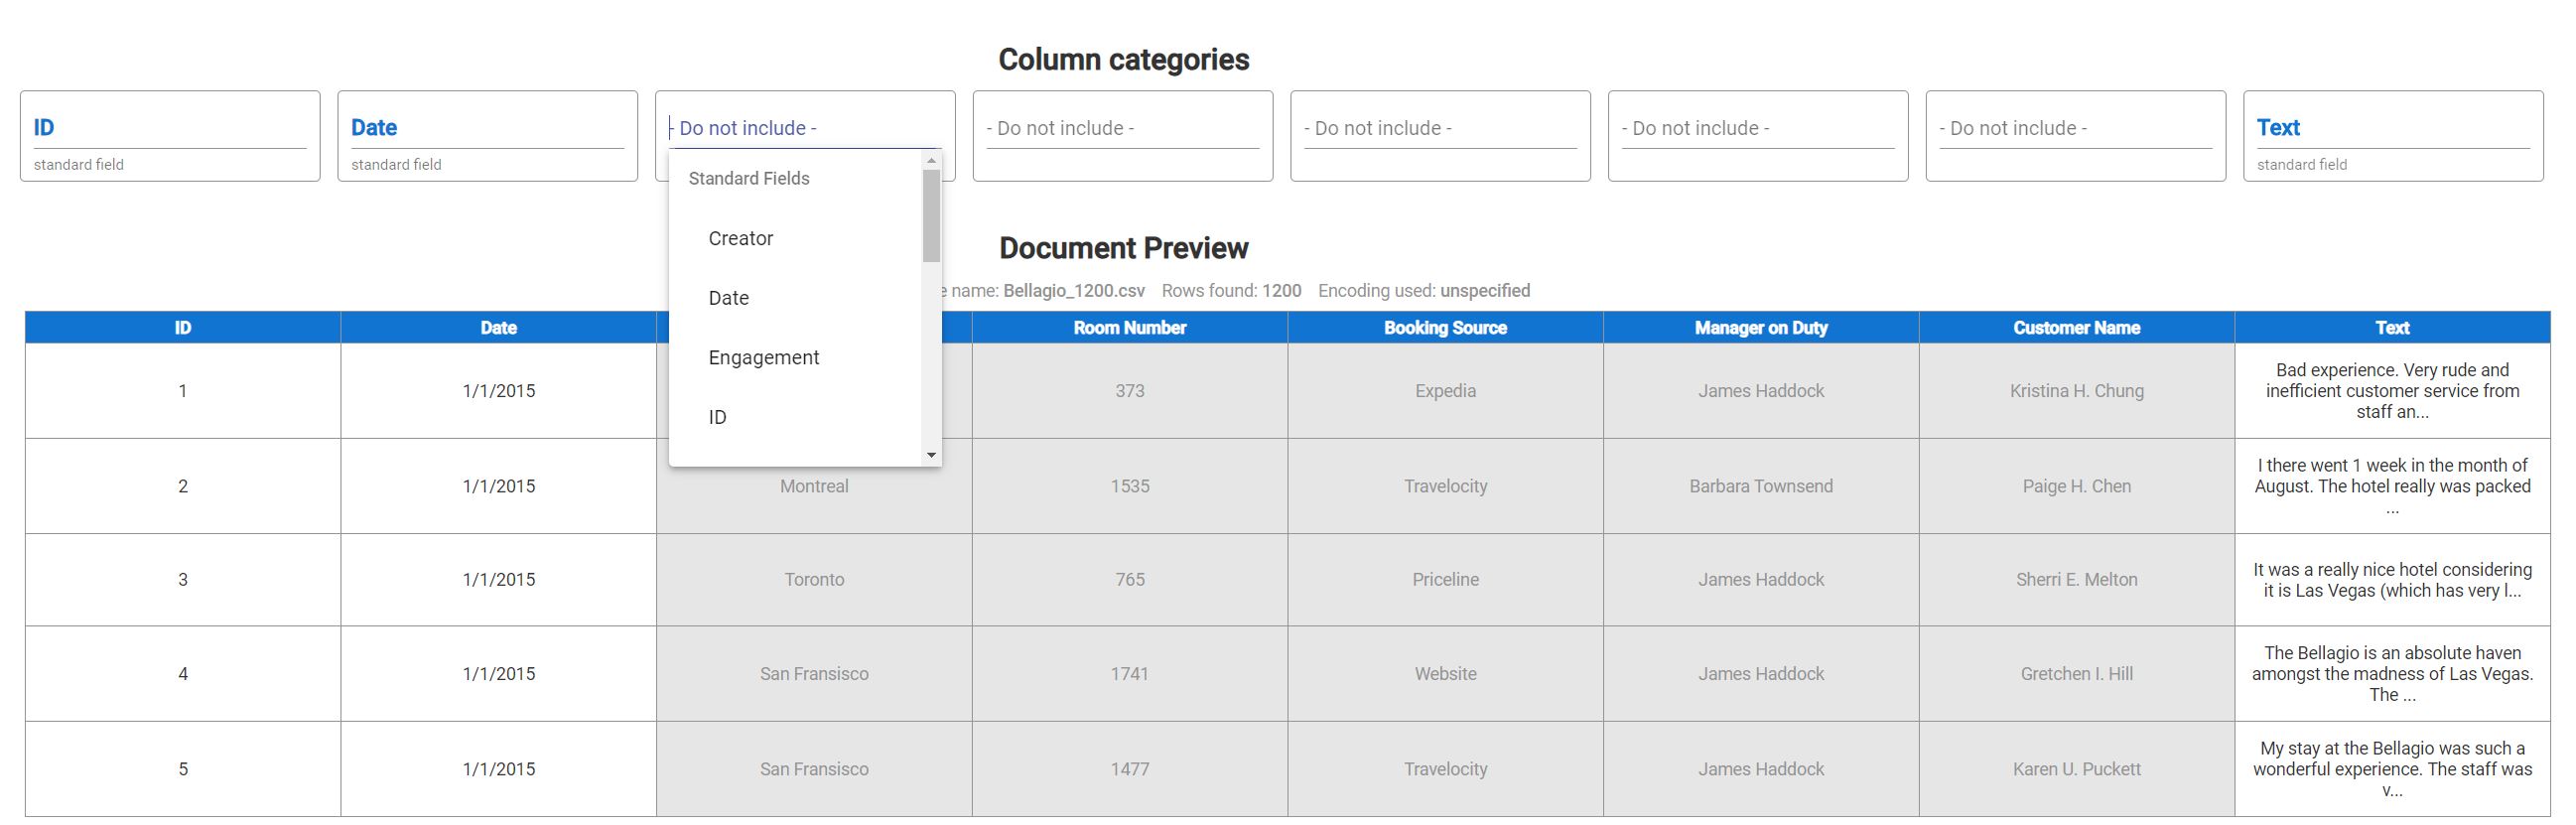 Pick column categories from a drop-down list or create custom categories